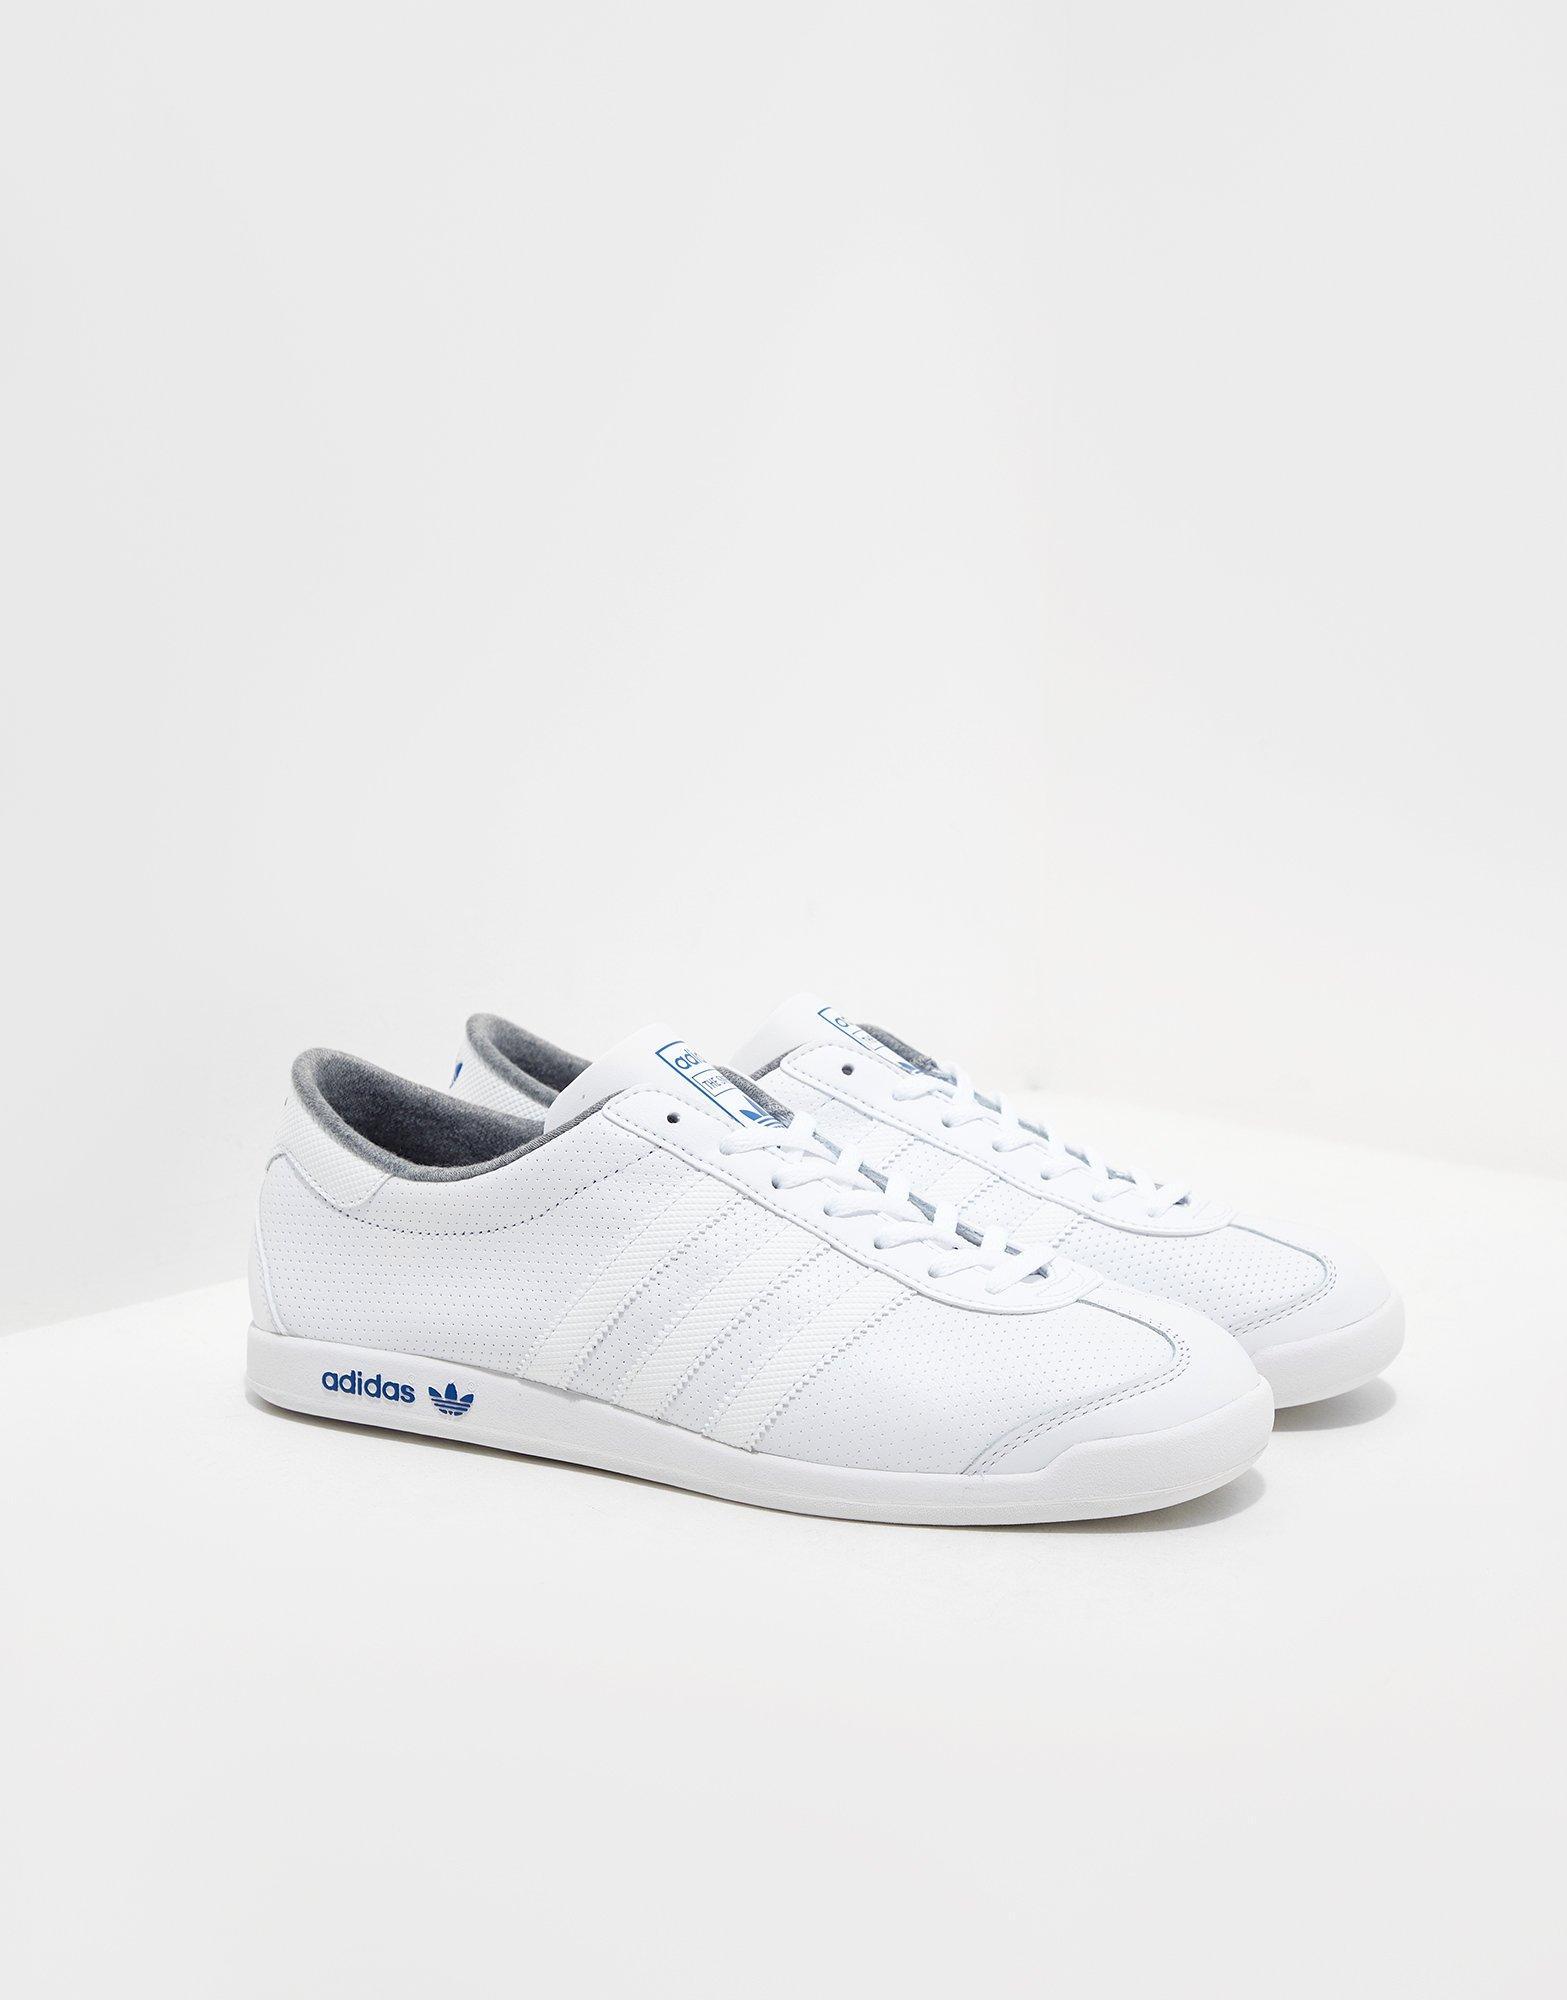 adidas Originals Leather The Sneeker White for Men - Lyst